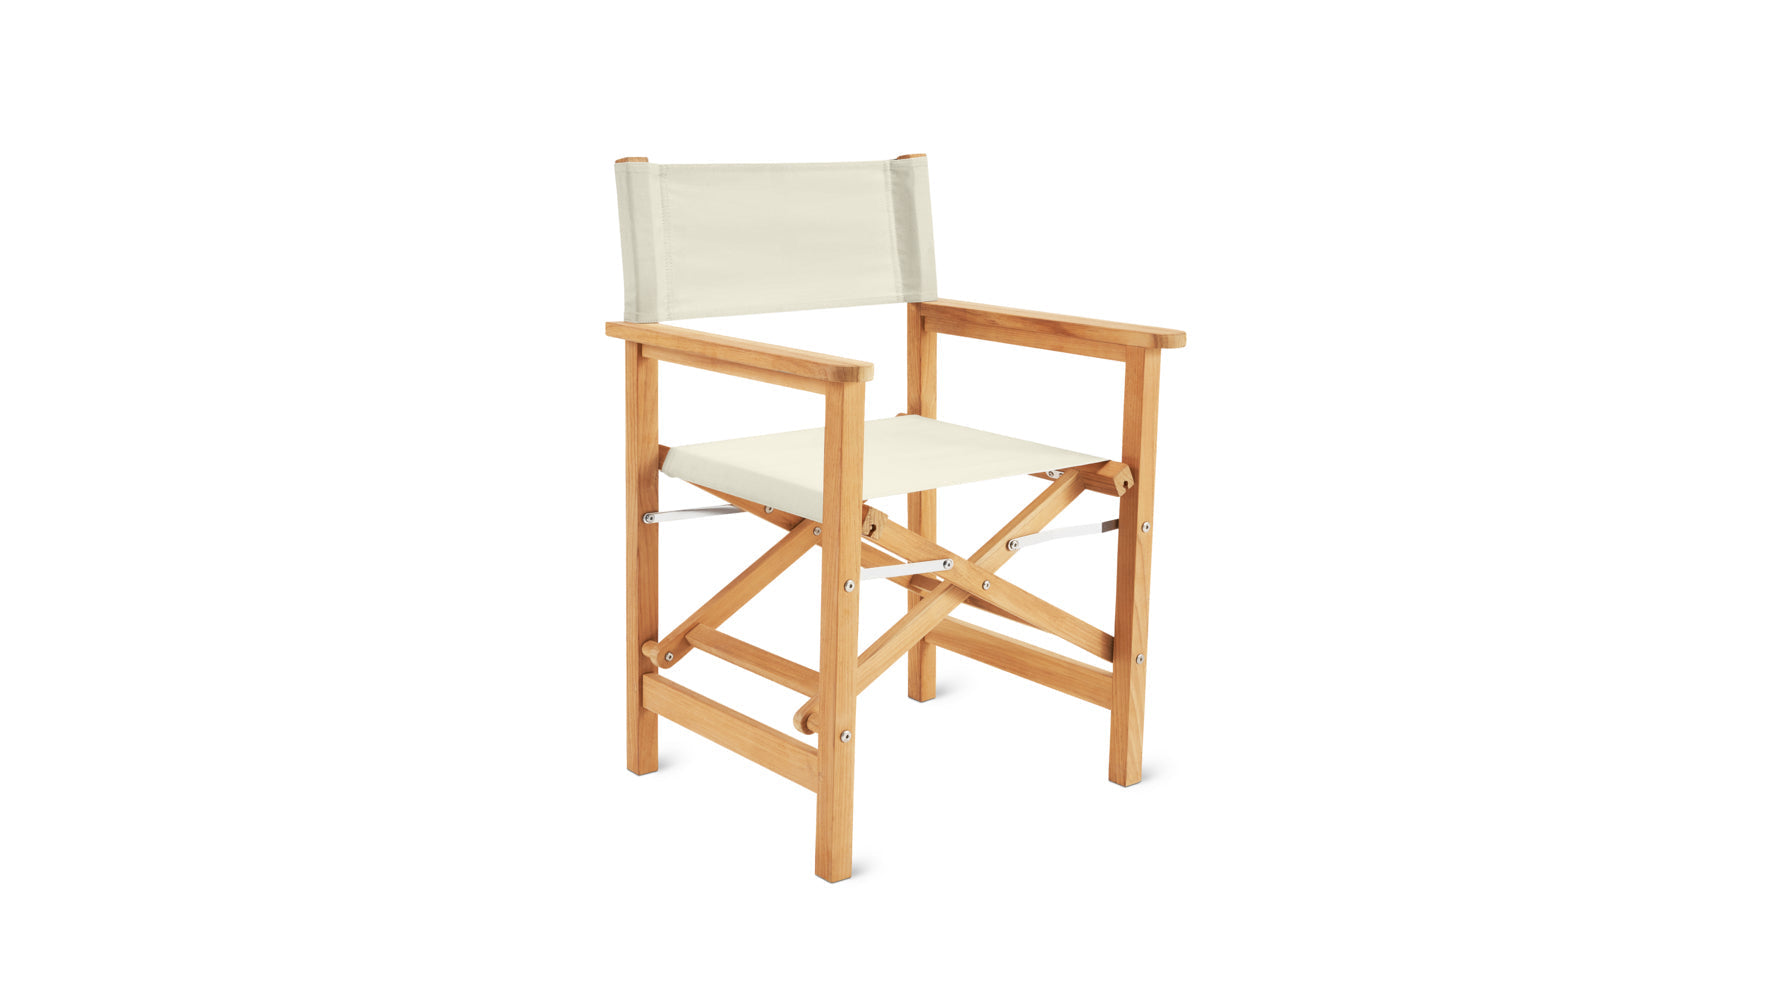 Take Five Outdoor Armchair, Canvas - Image 3